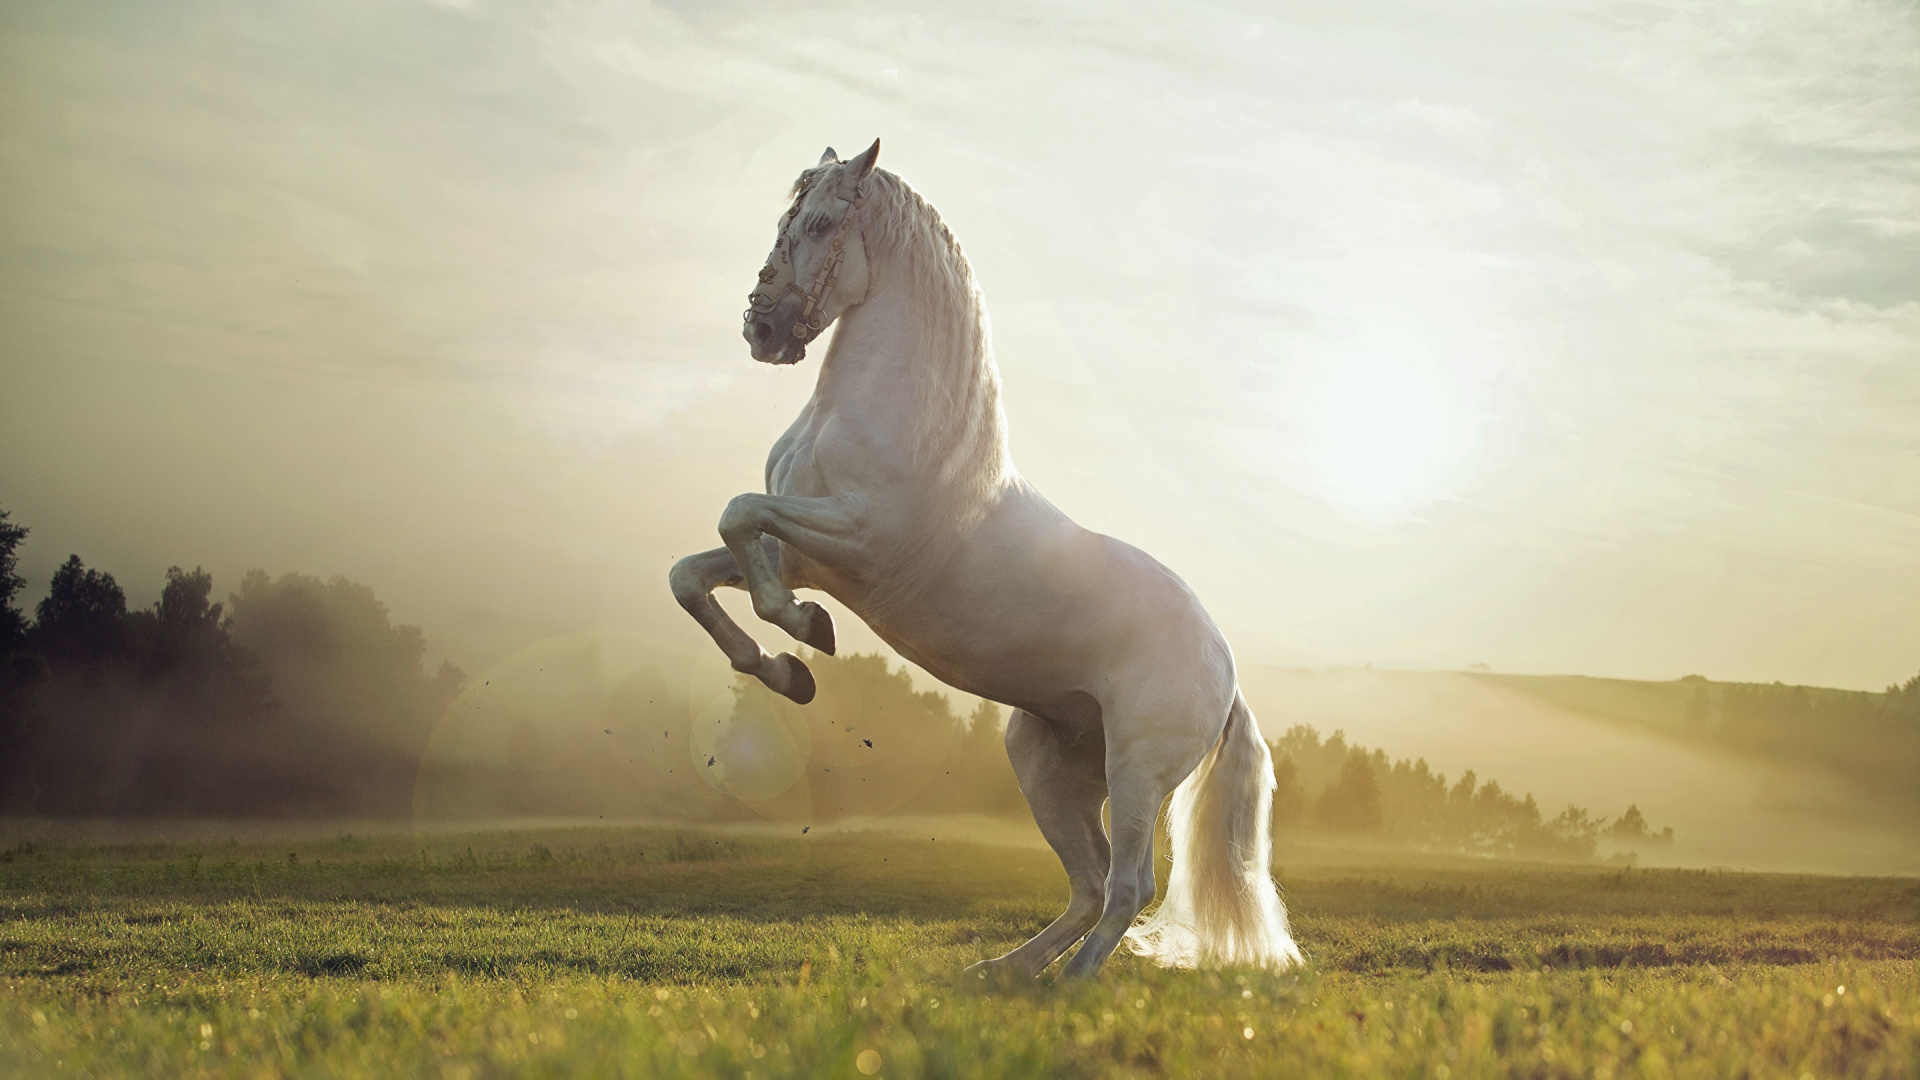 White Horse Running on Green Grass Field During Daytime. Wallpaper in 1920x1080 Resolution